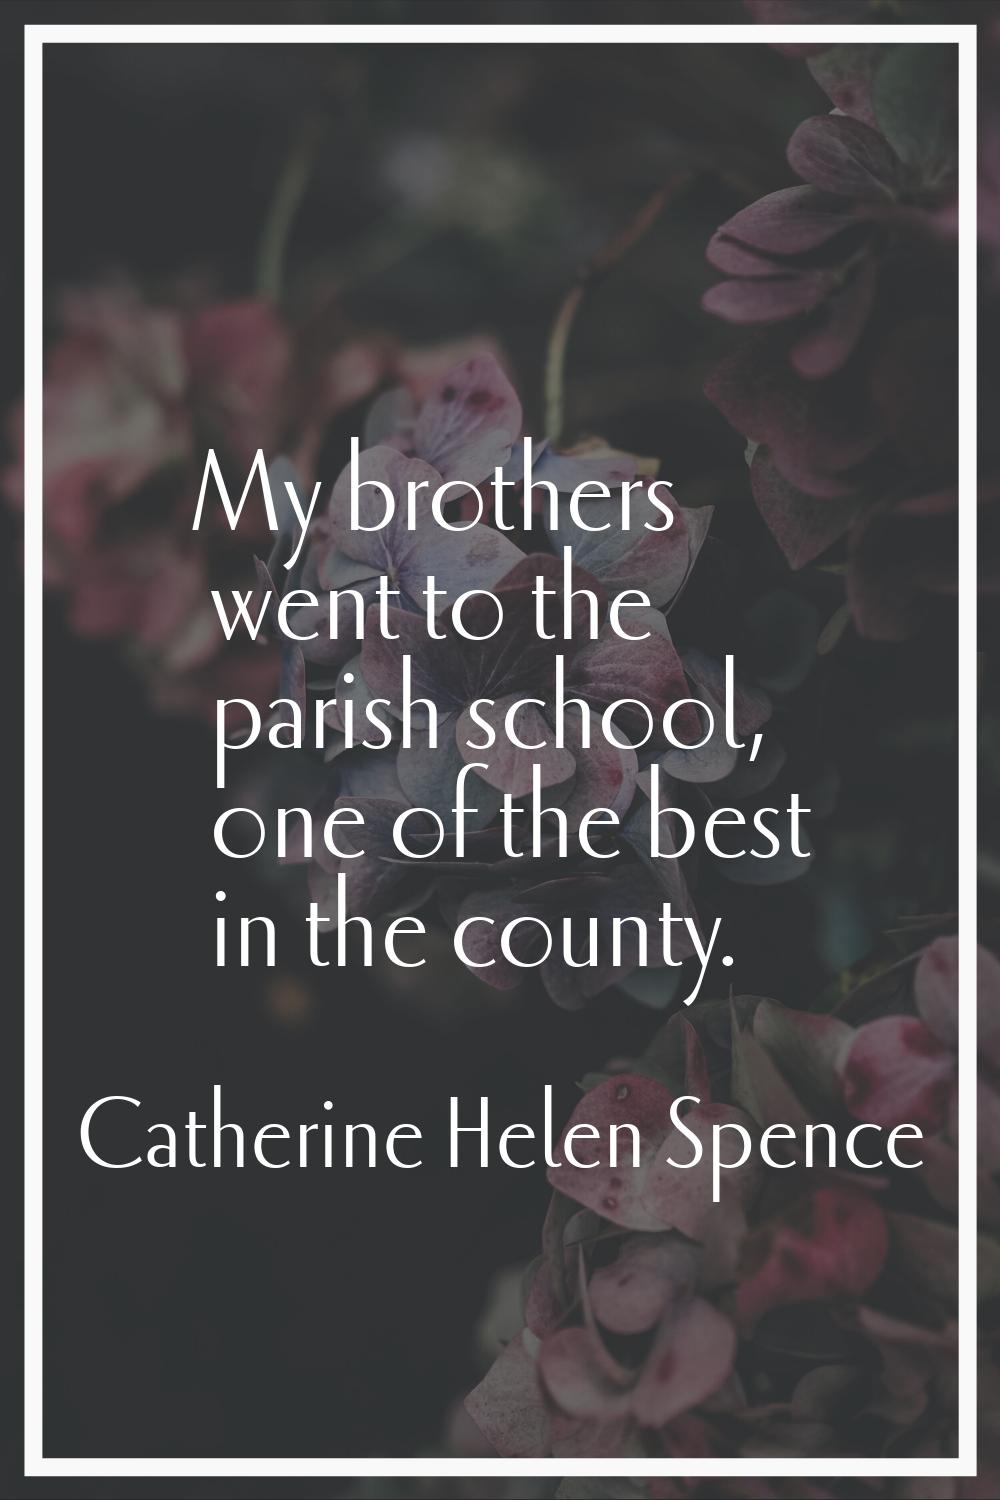 My brothers went to the parish school, one of the best in the county.